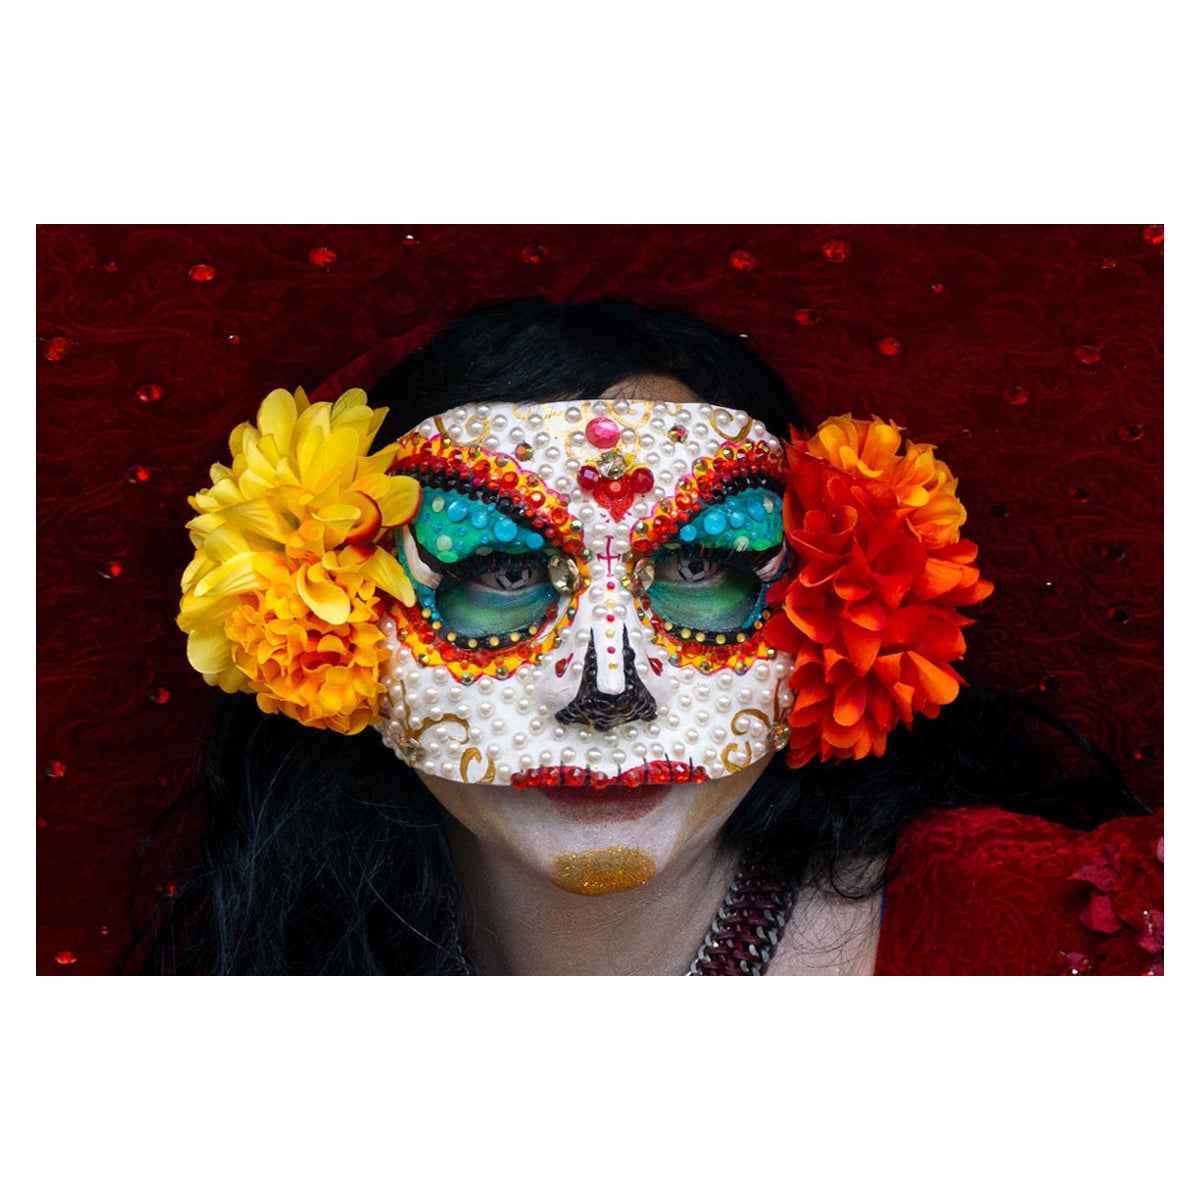 The history of La Catrina begins during the governments of Benito Juárez, Sebastián Lerdo de Tejada and Porfirio Díaz. In these periods, texts written by the middle class began to become popular that criticized both the general situation of the